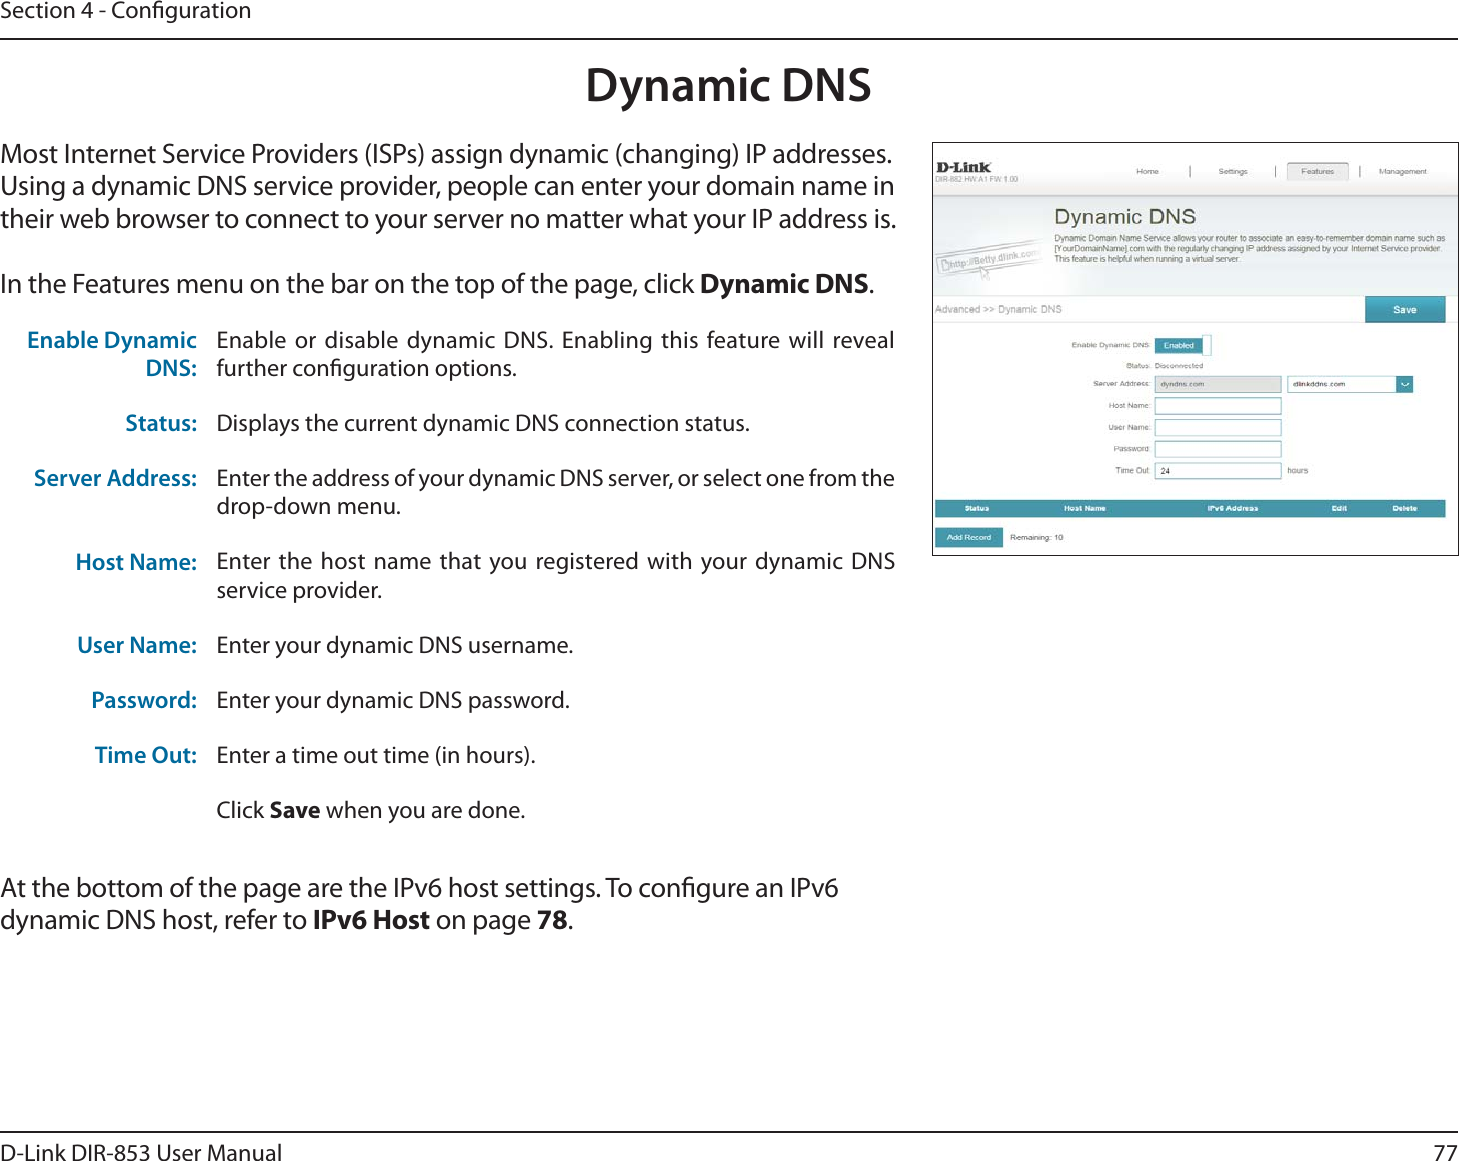 77D-Link DIR-853 User ManualSection 4 - CongurationDynamic DNSMost Internet Service Providers (ISPs) assign dynamic (changing) IP addresses. Using a dynamic DNS service provider, people can enter your domain name in their web browser to connect to your server no matter what your IP address is.In the Features menu on the bar on the top of the page, click Dynamic DNS.At the bottom of the page are the IPv6 host settings. To congure an IPv6 dynamic DNS host, refer to IPv6 Host on page 78.Enable Dynamic DNS:Enable or disable dynamic DNS. Enabling this feature will reveal further conguration options.Status: Displays the current dynamic DNS connection status.Server Address: Enter the address of your dynamic DNS server, or select one from the drop-down menu.Host Name: Enter the host name that you registered with your dynamic DNS service provider.User Name: Enter your dynamic DNS username.Password: Enter your dynamic DNS password.Time Out: Enter a time out time (in hours).Click Save when you are done.